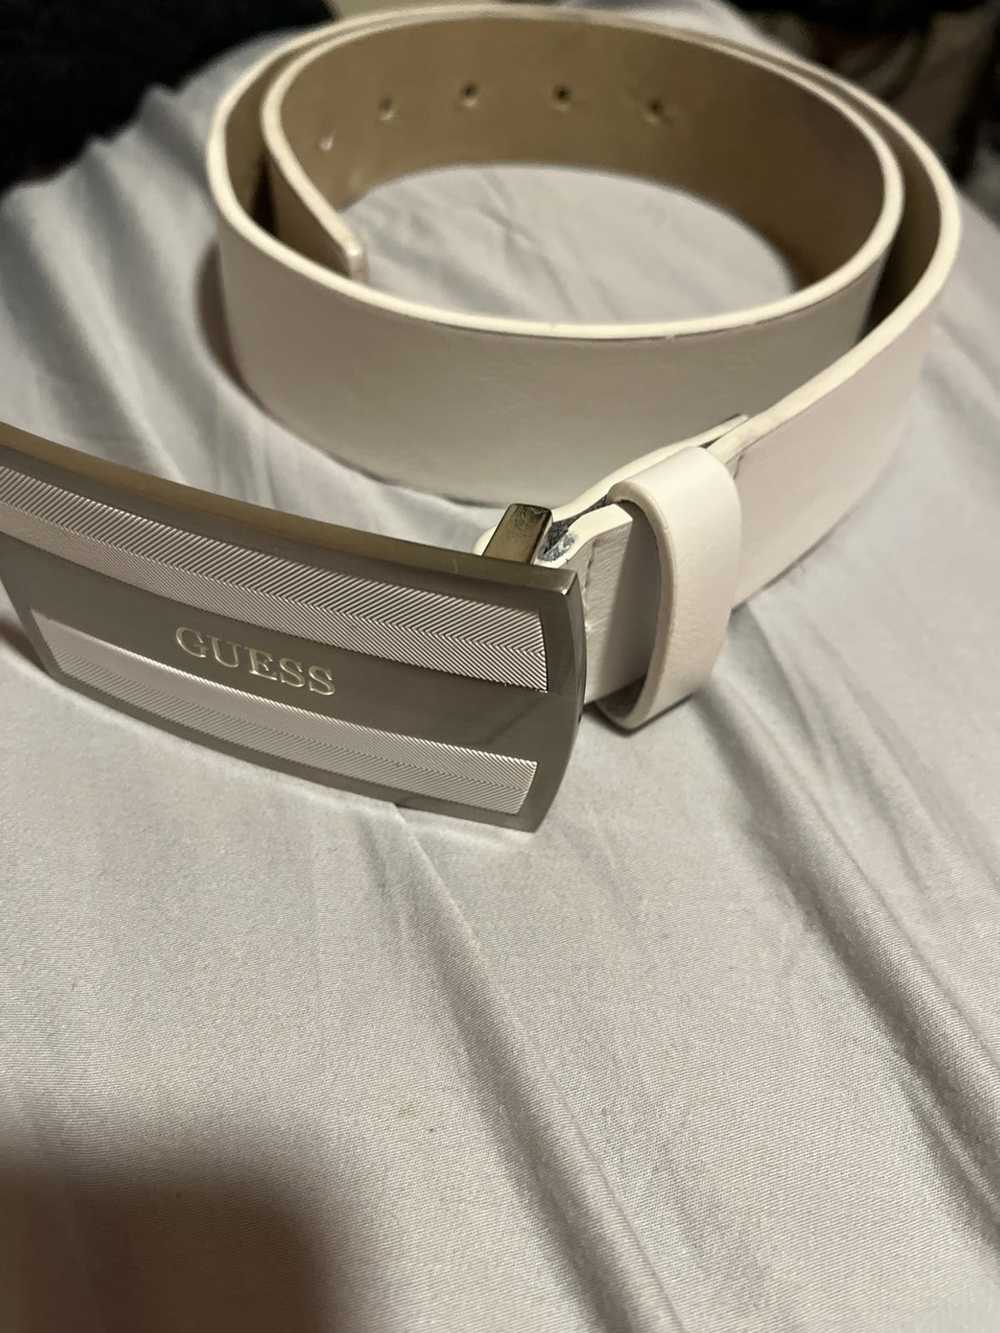 Guess White leather guess belt - image 4